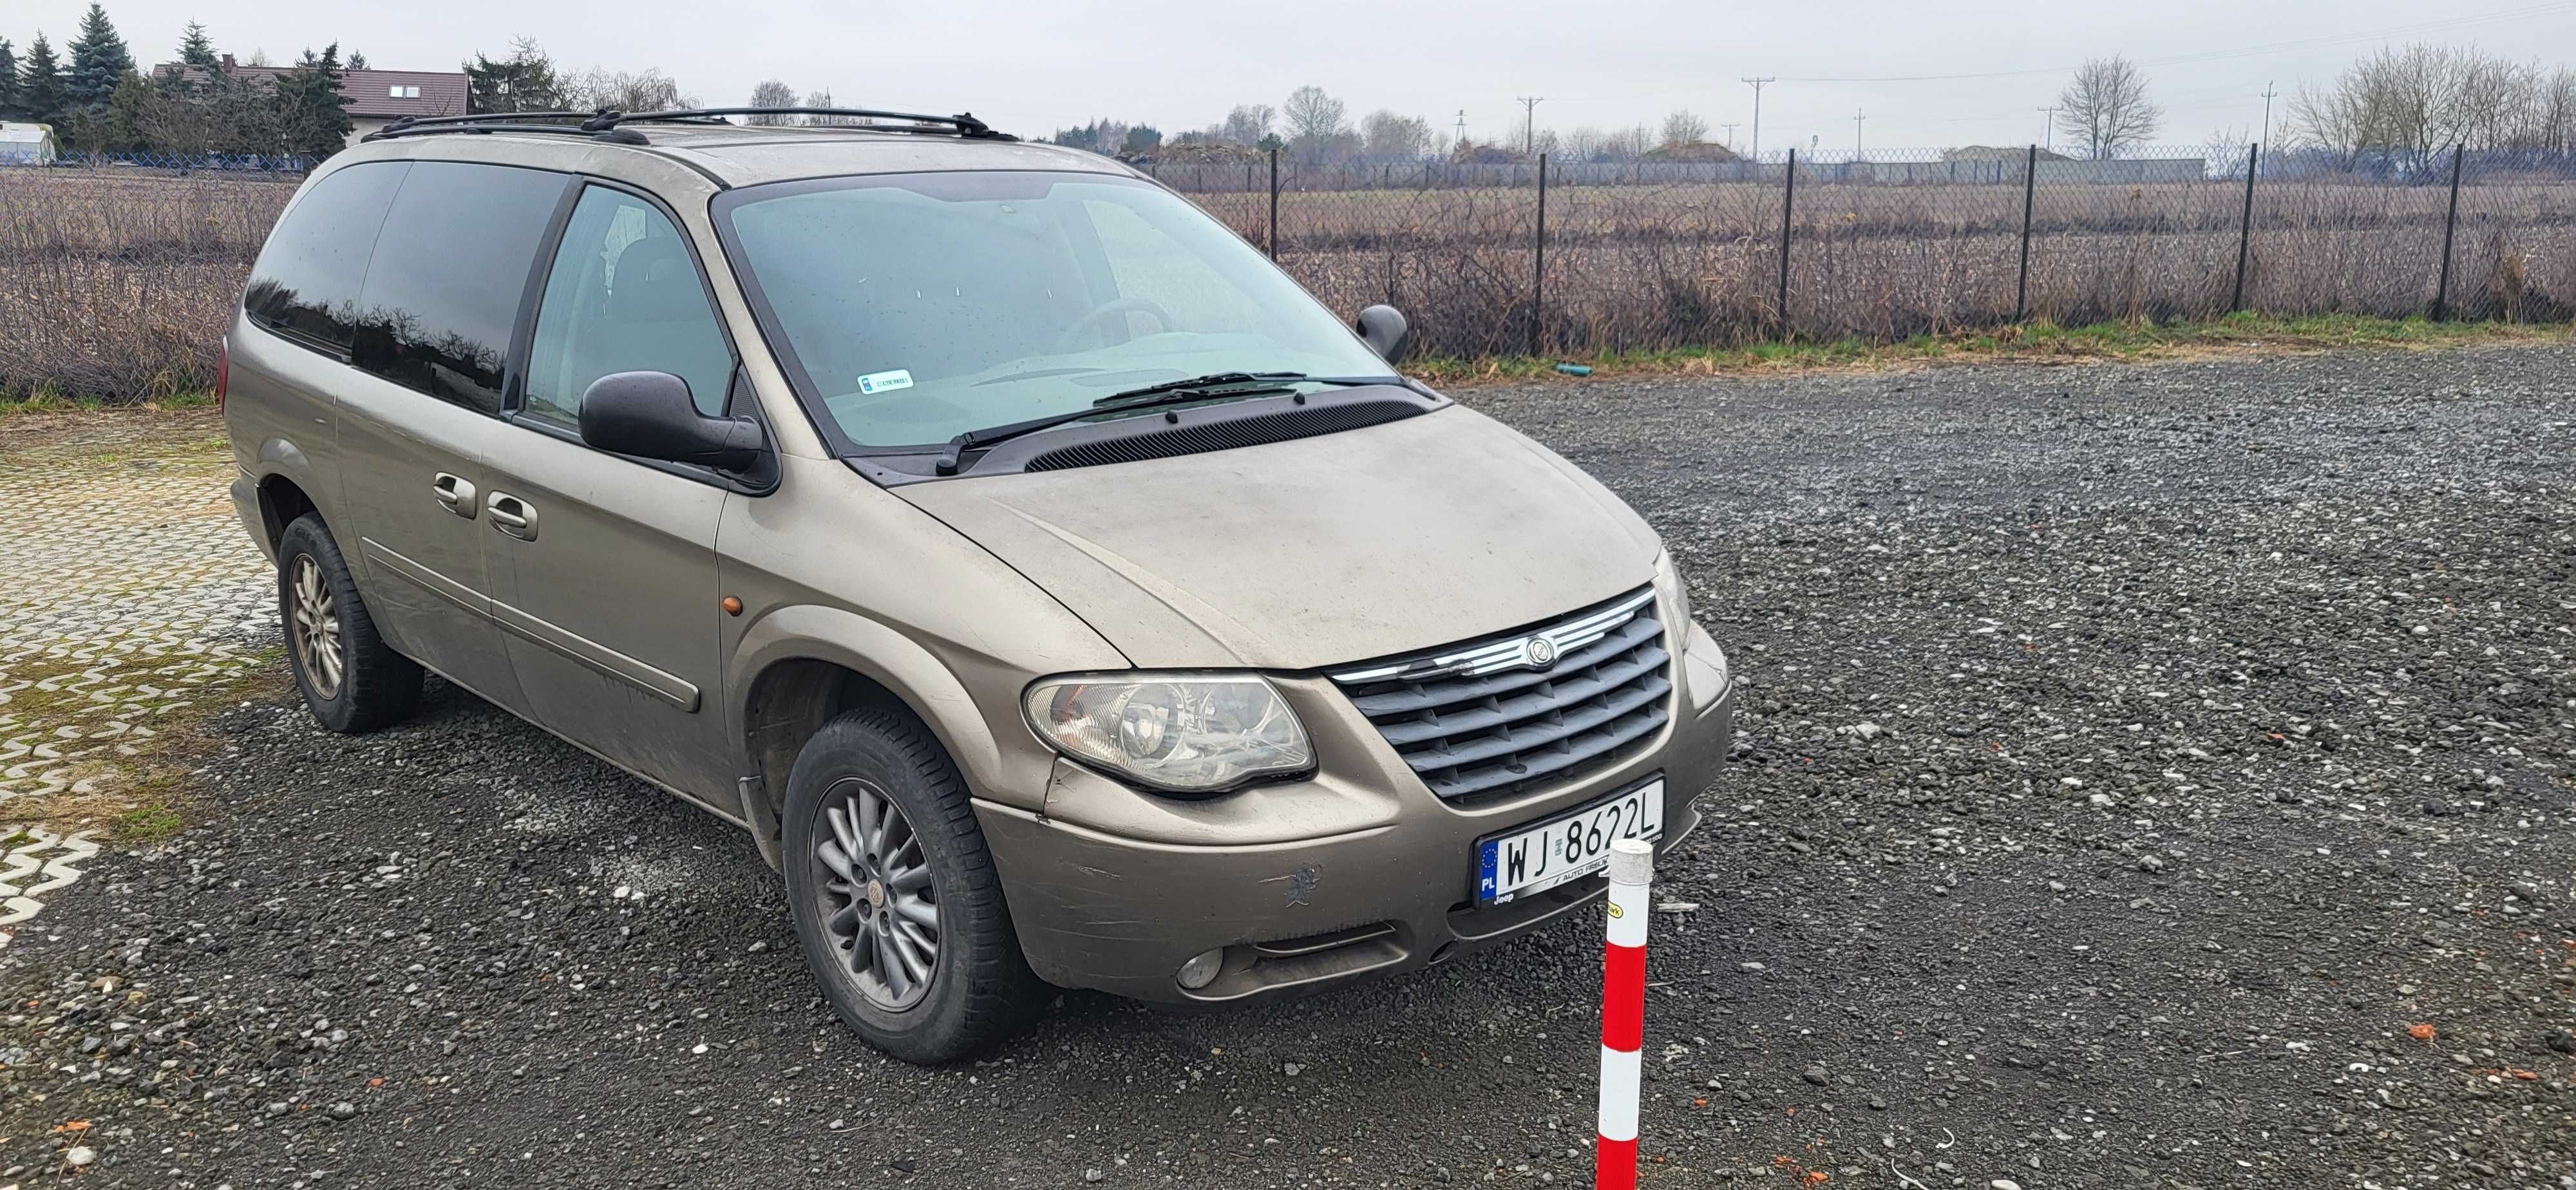 Grand Voyager 2.8 crd